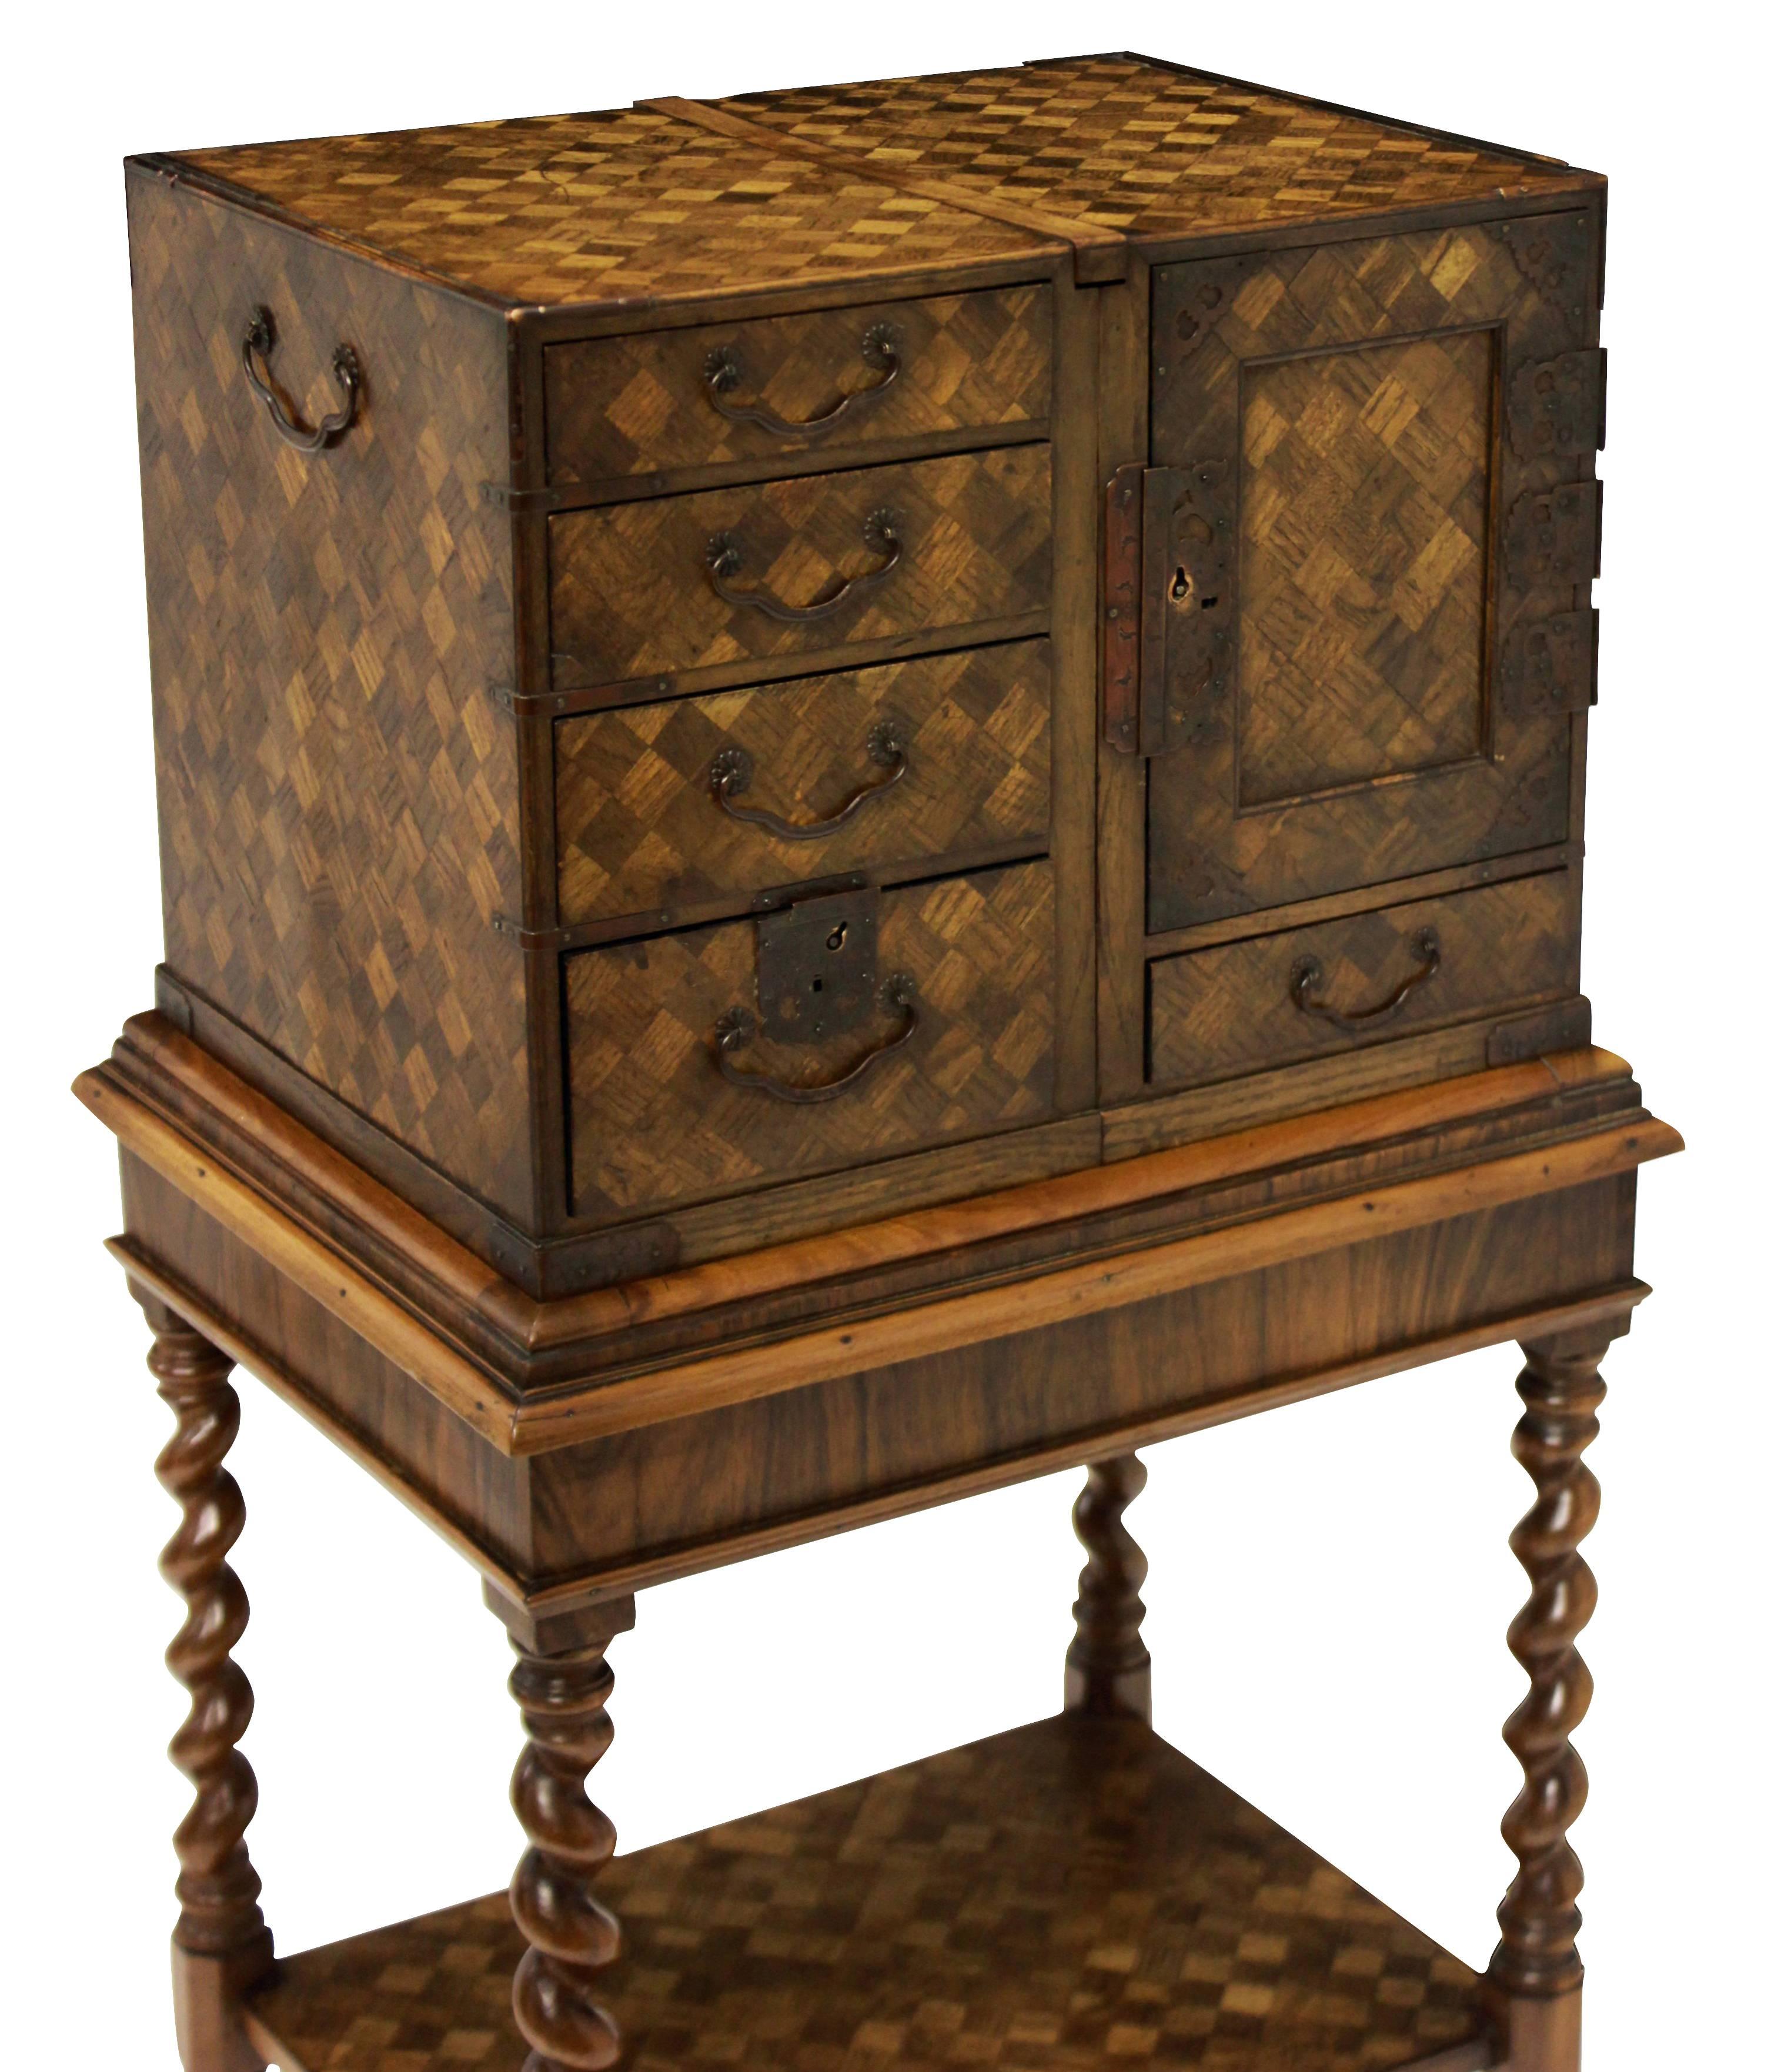 An English William & Mary chest on stand in walnut and oak, with a Japanned interior of red and black lacquer.